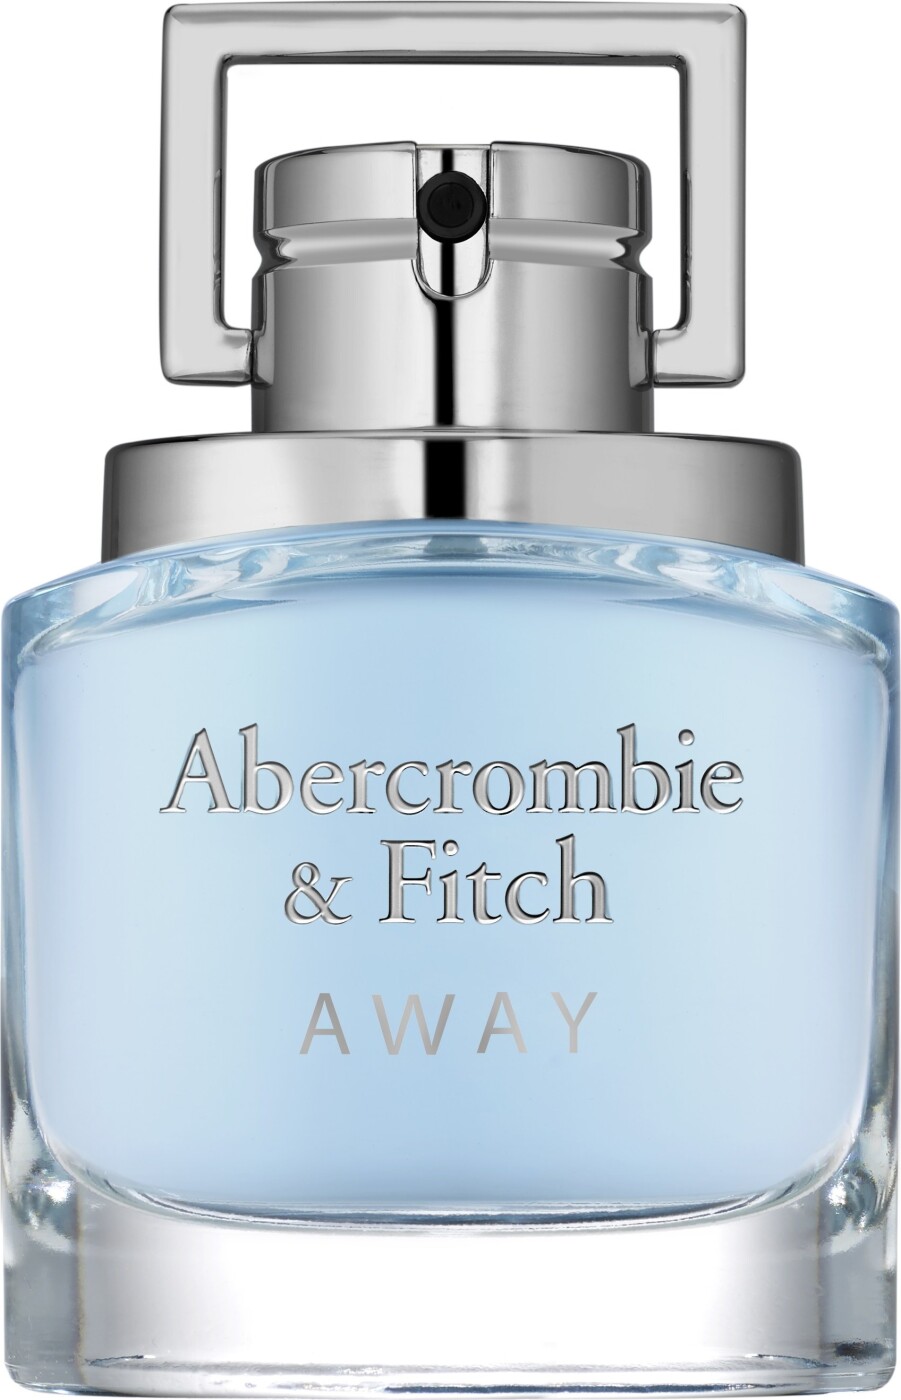 Se Abercrombie & Fitch - First Away Men Edt 50 Ml hos Gucca.dk